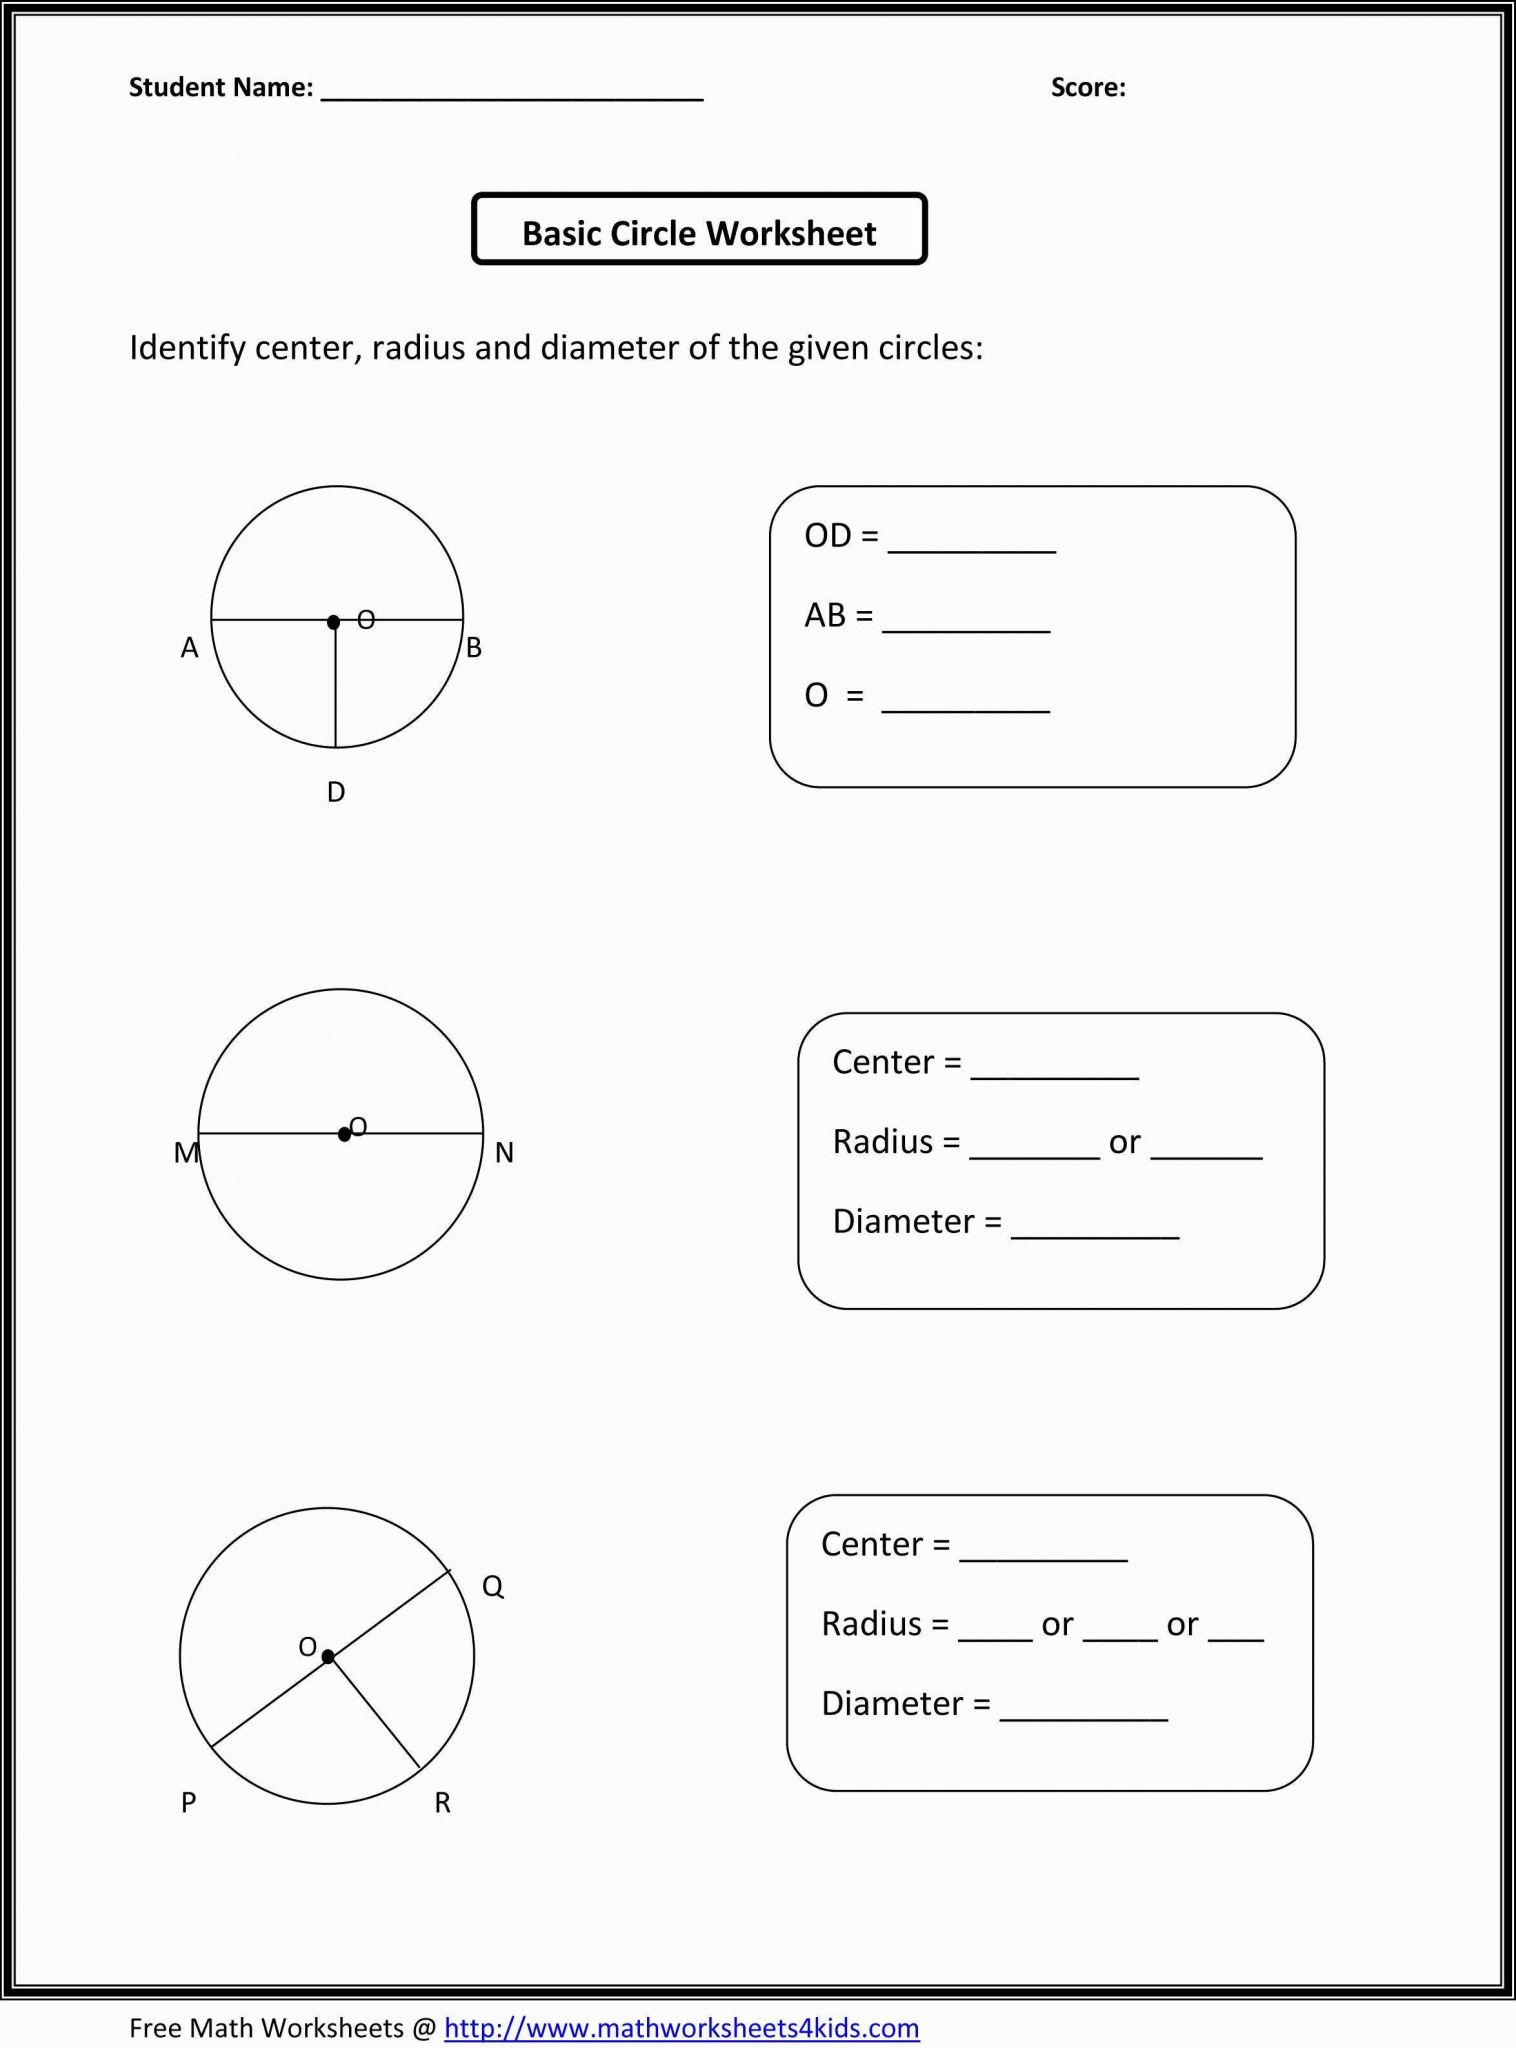 Managing A Checking Account Worksheet Answers or 13 Best Math Fact Worksheet Generator